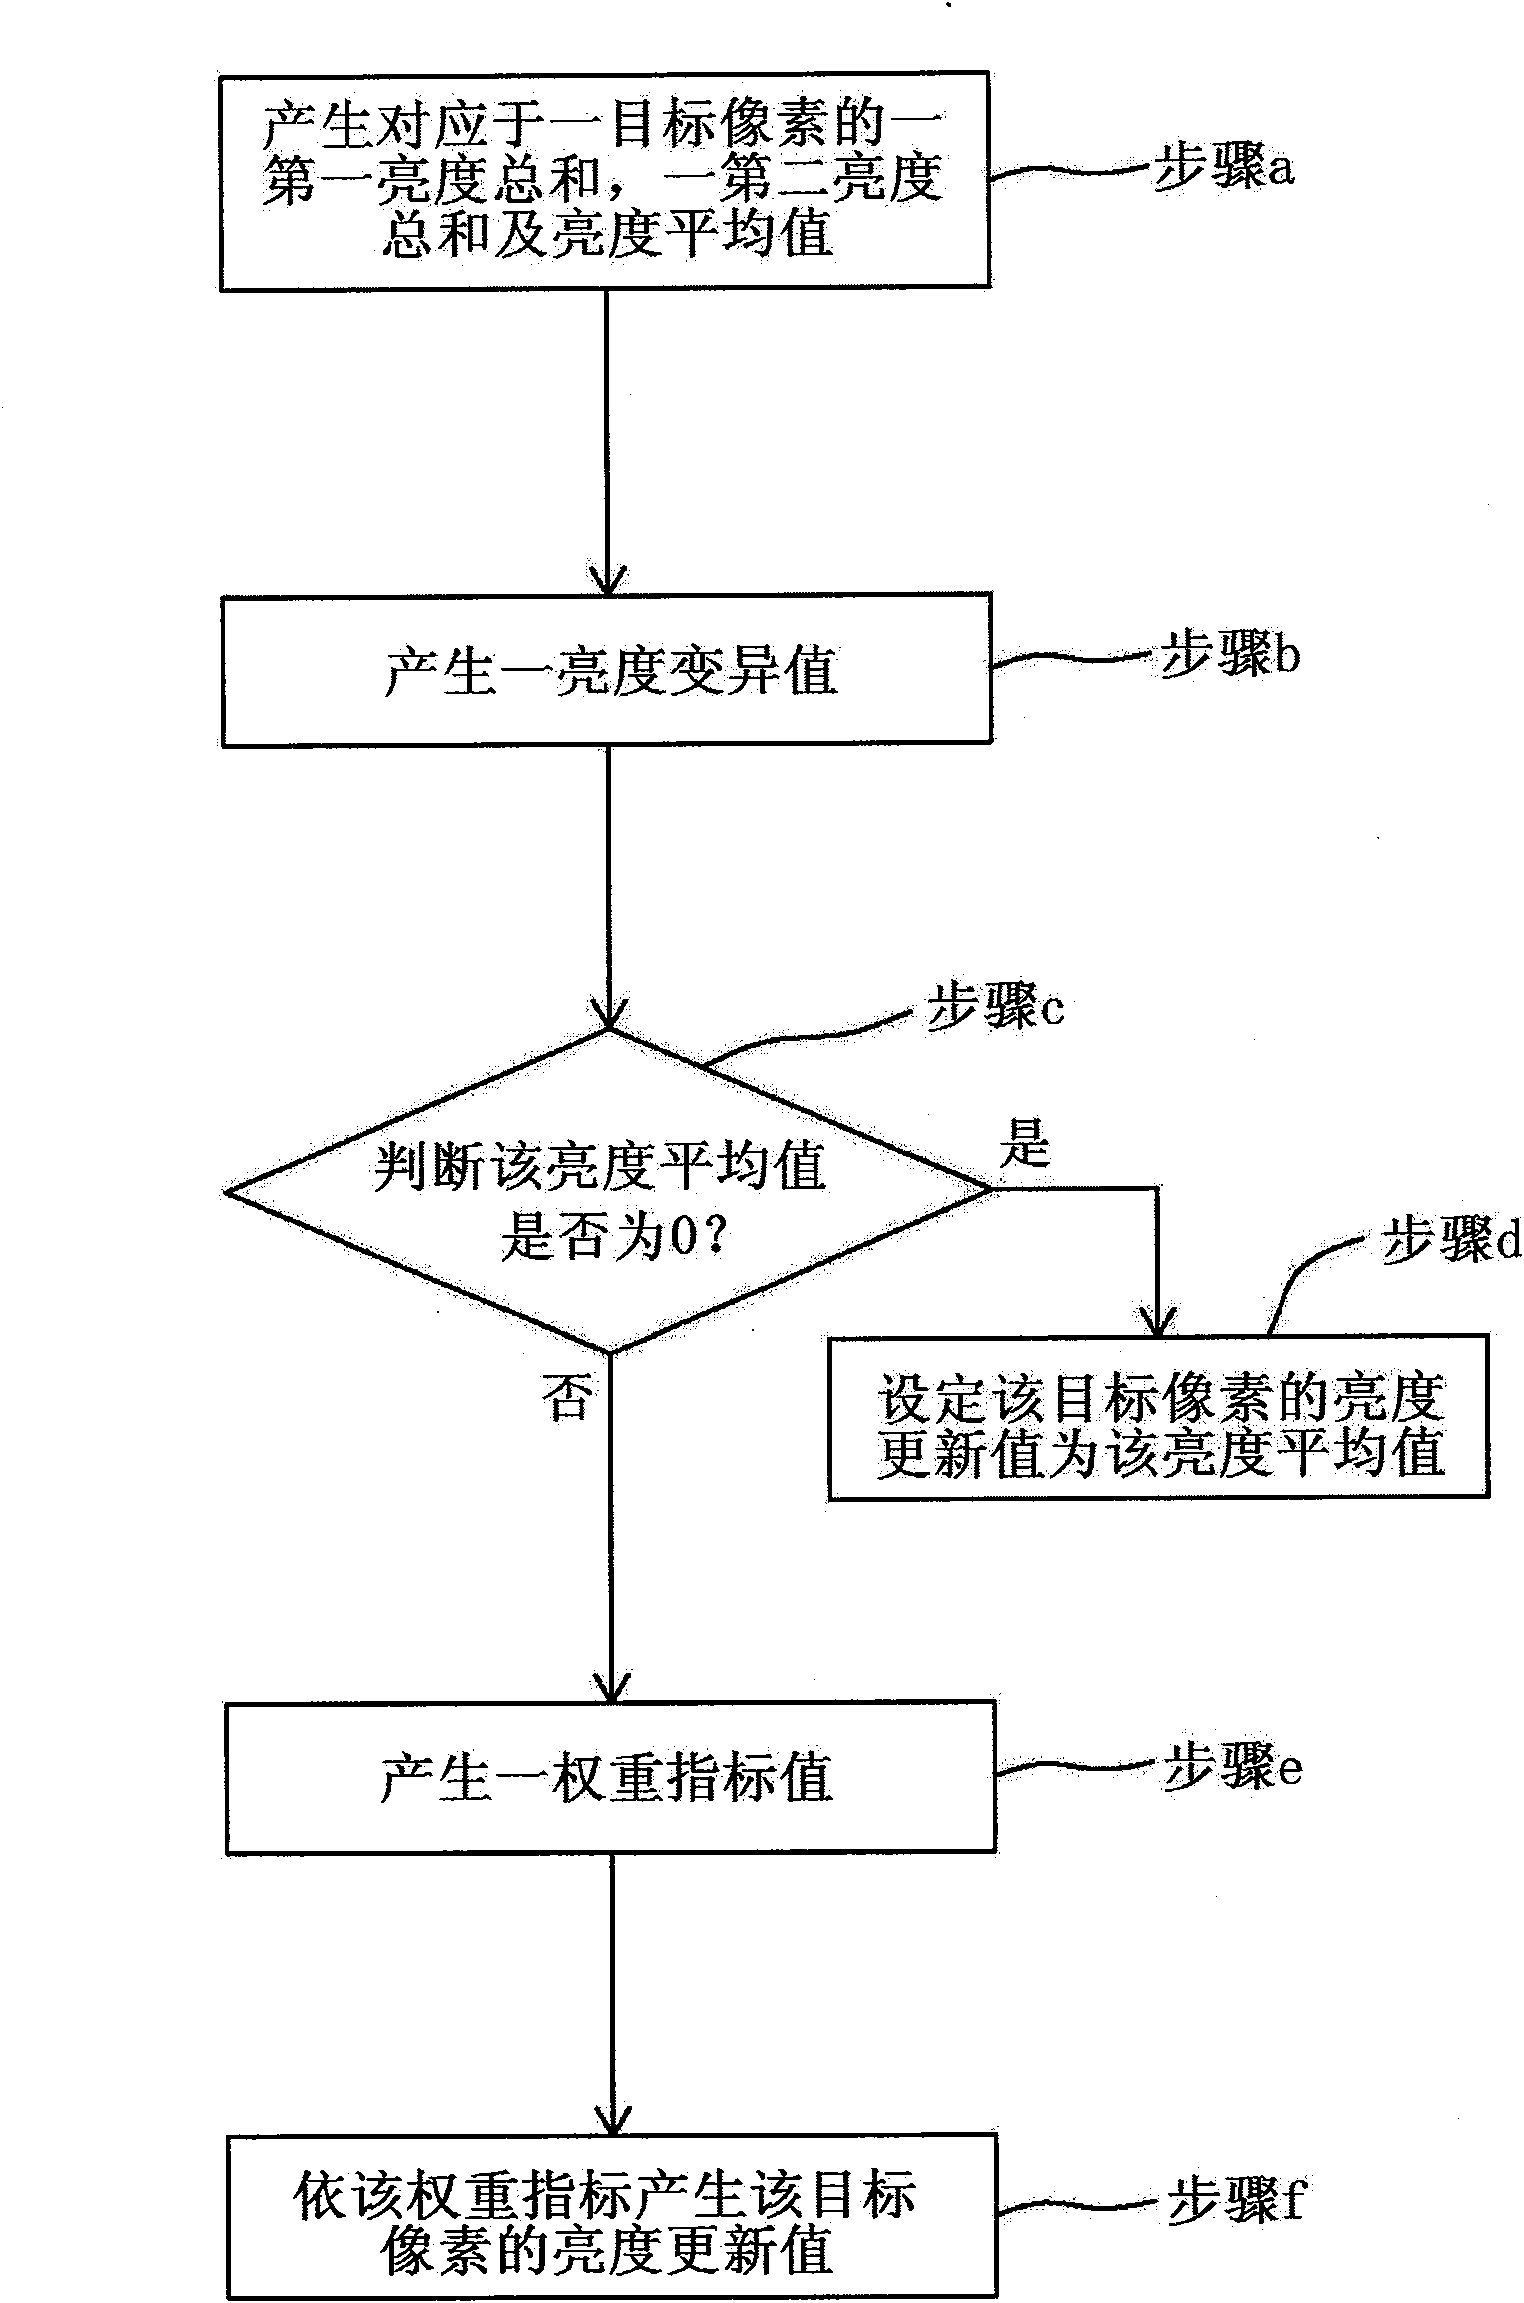 Method and device for adjusting television image